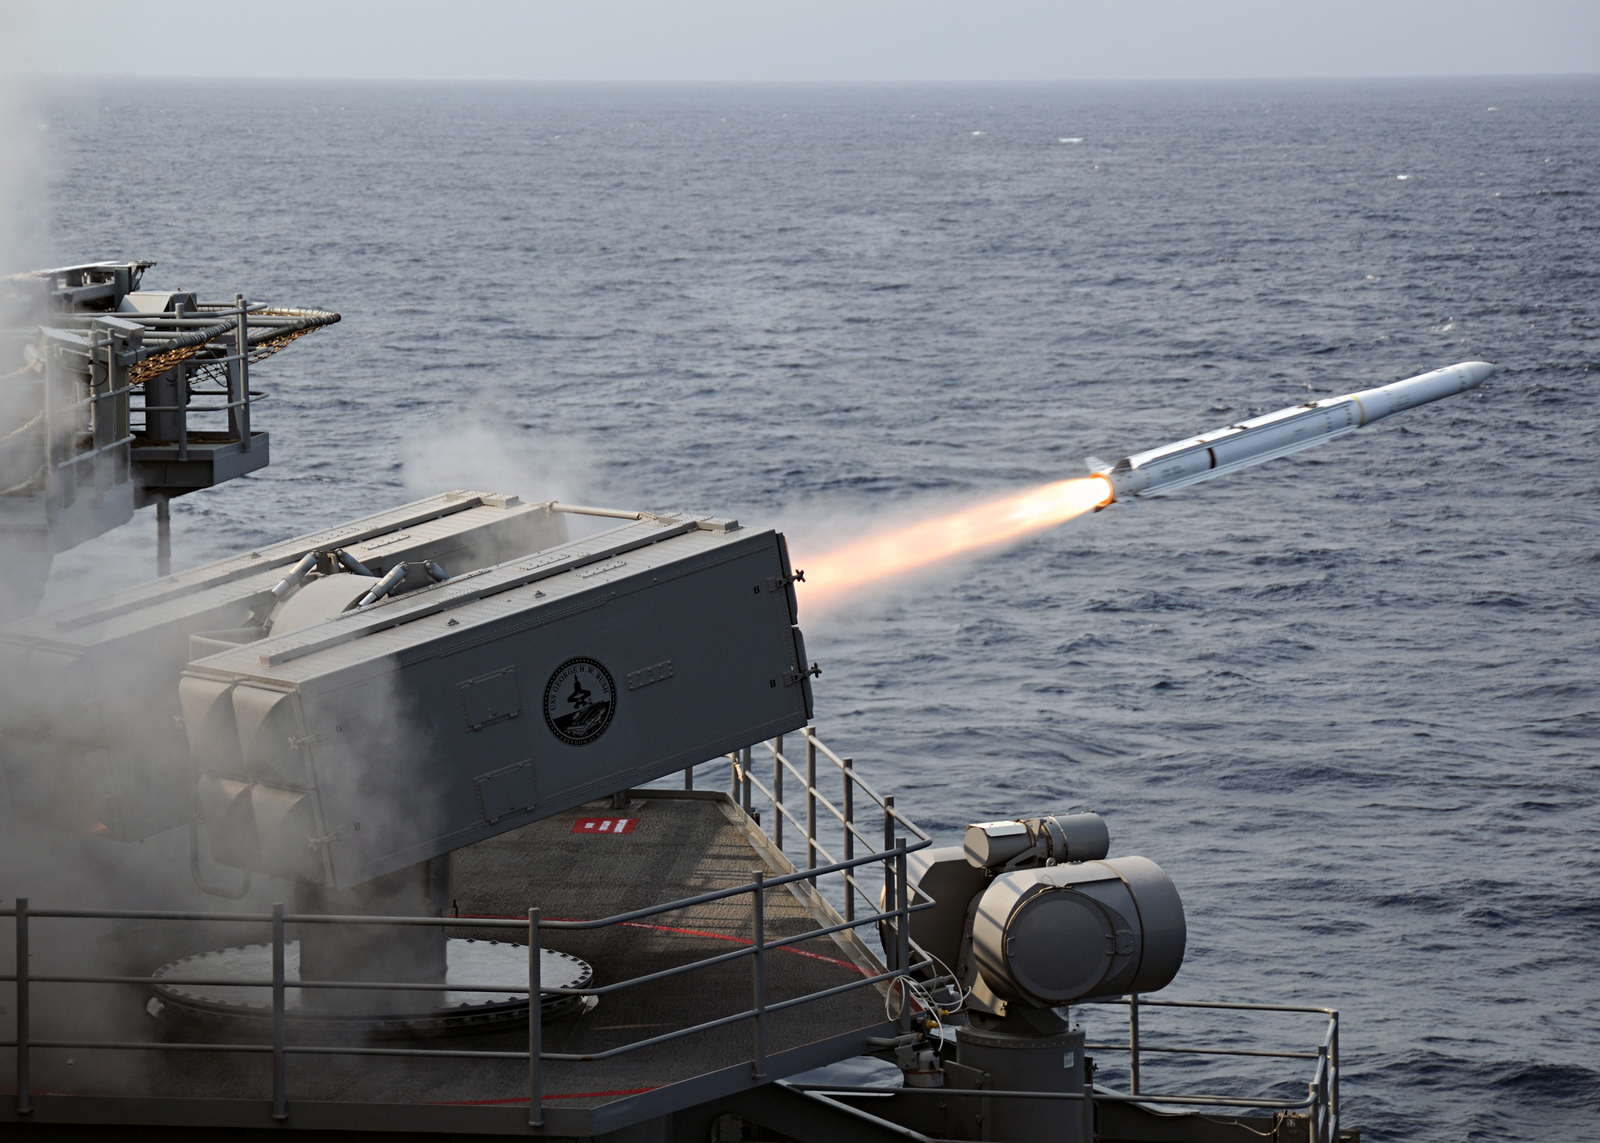 _Sea_Sparrow_missile_is_launched_from_the_aircraft_carrier_USS_George_H.W._Bush_%2528CVN_77%2529.jpg